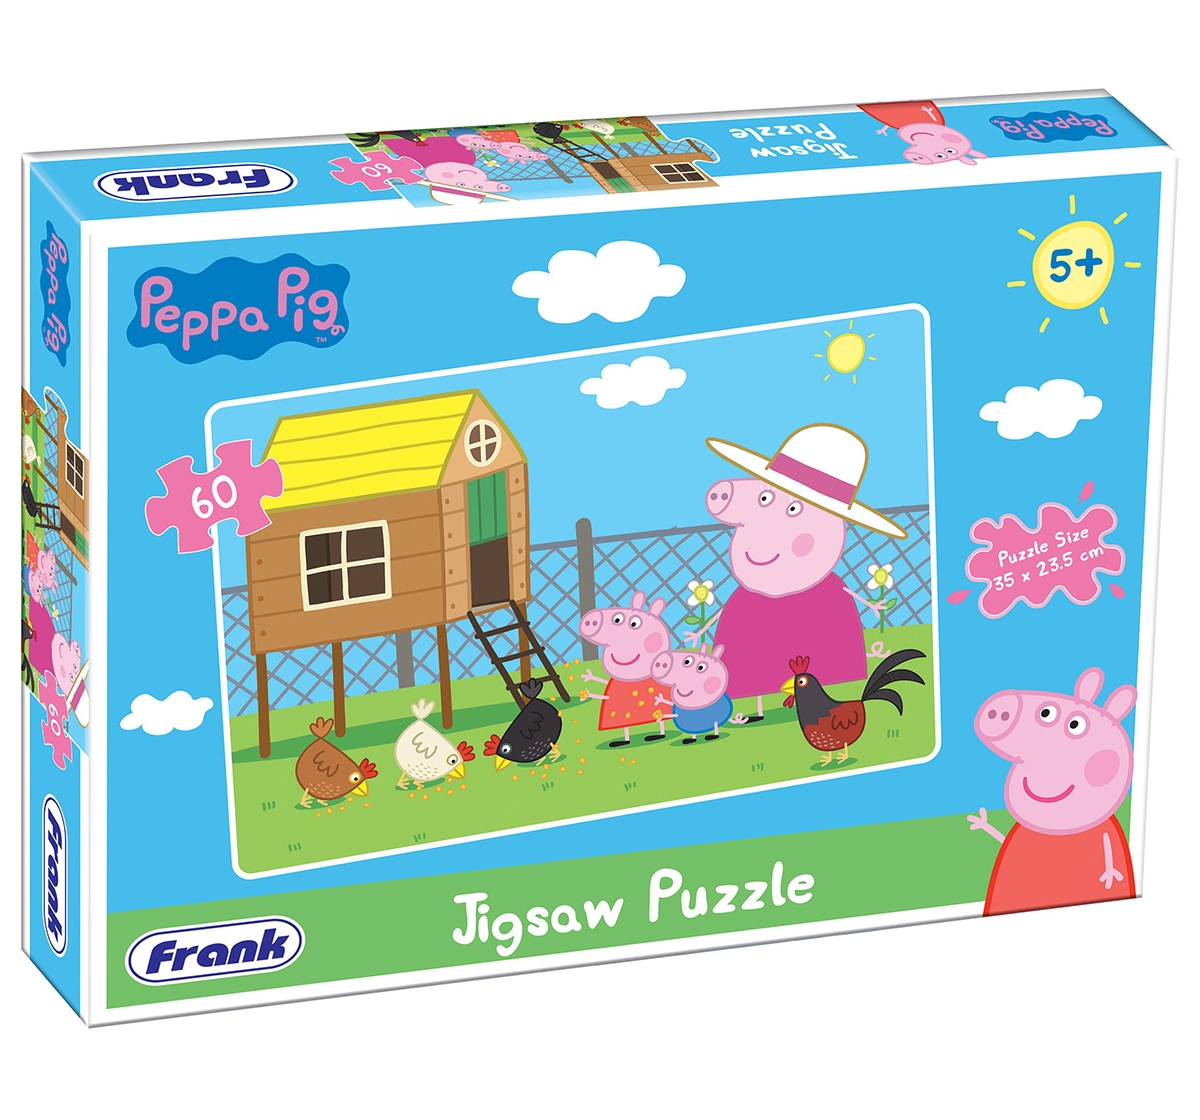 Frank | Frank Peppa Pig 60 Pcs Puzzle Puzzles for Kids age 5Y+  0